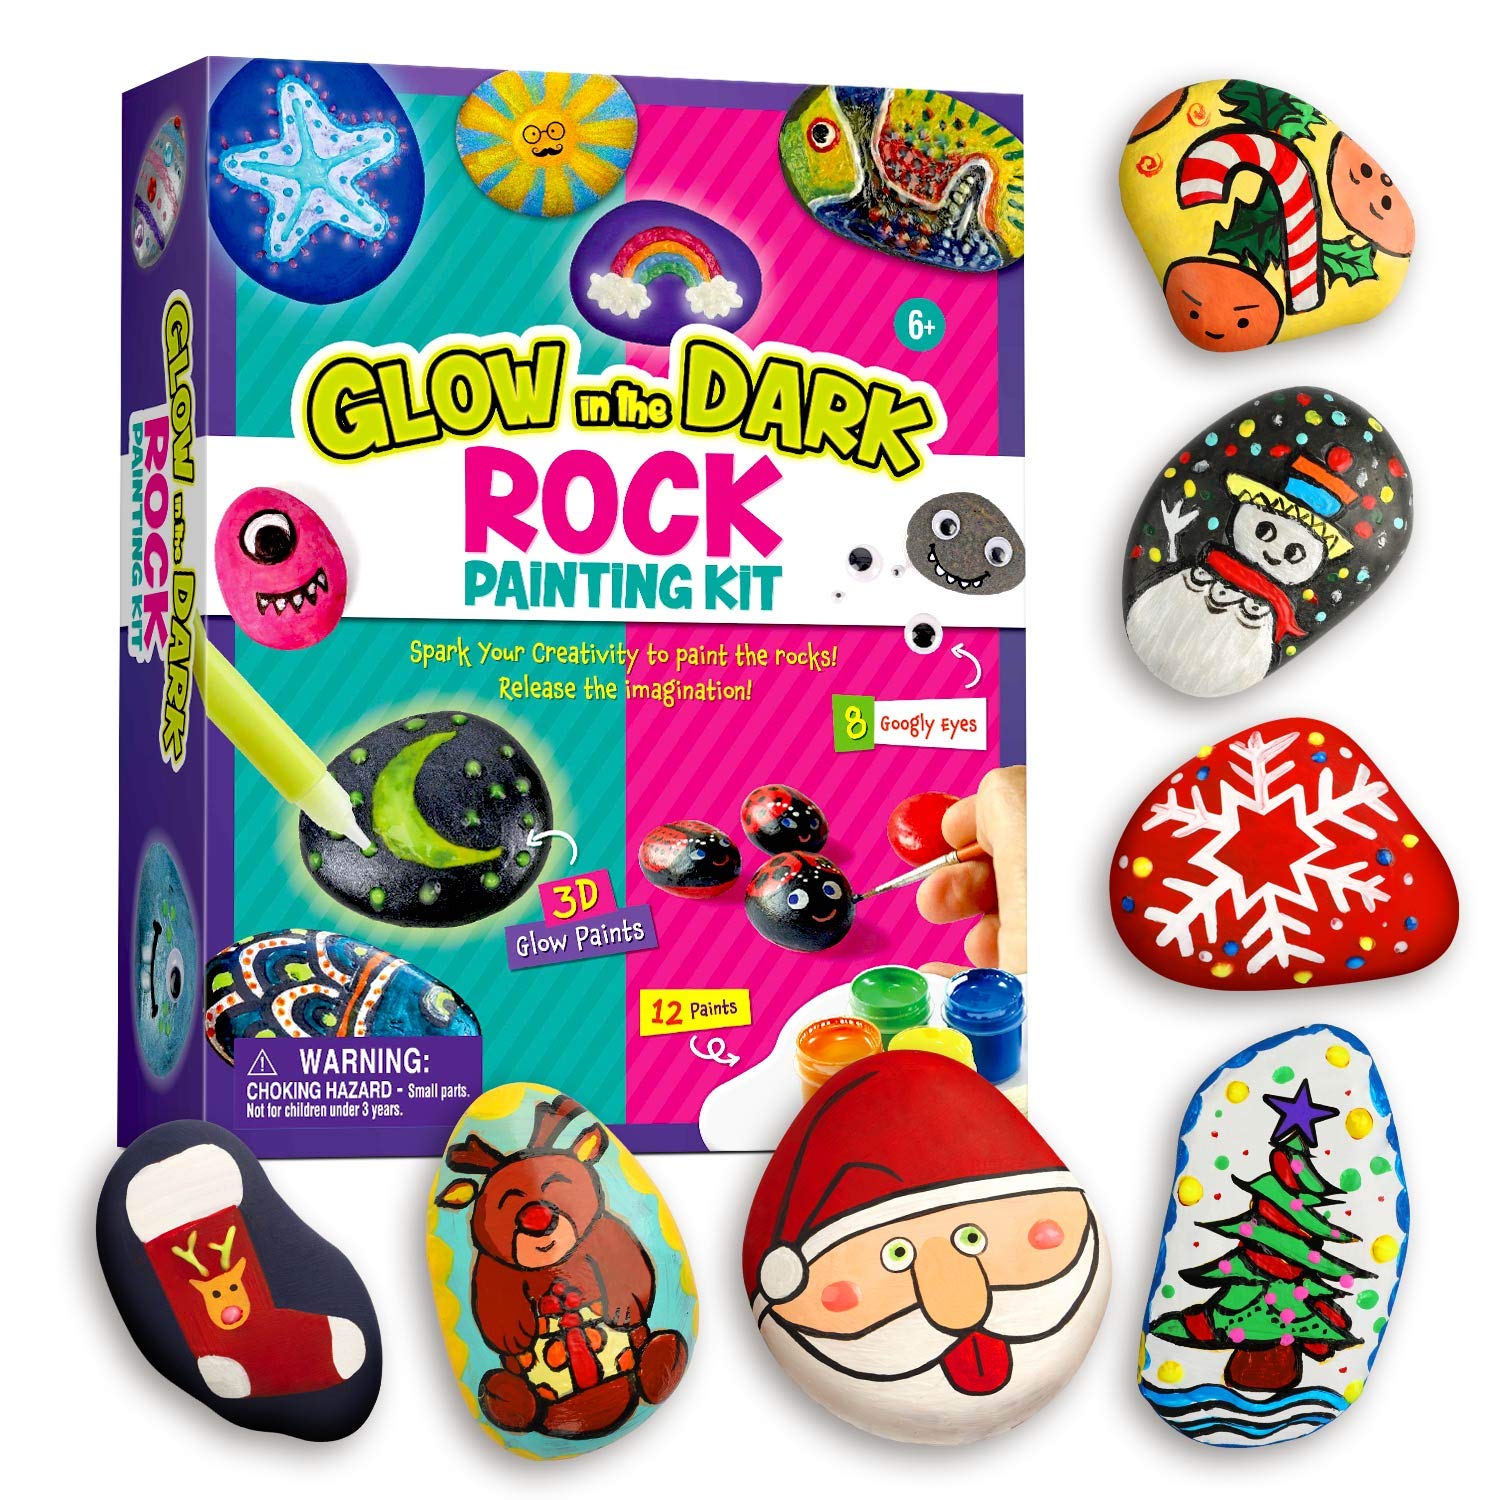  Kids Rock Painting Kit - Glow in The Dark - Arts & Crafts Gifts  for Boys and Girls Ages 4-12 - Craft Activities Kits - Creative Art Toys  for 4, 5